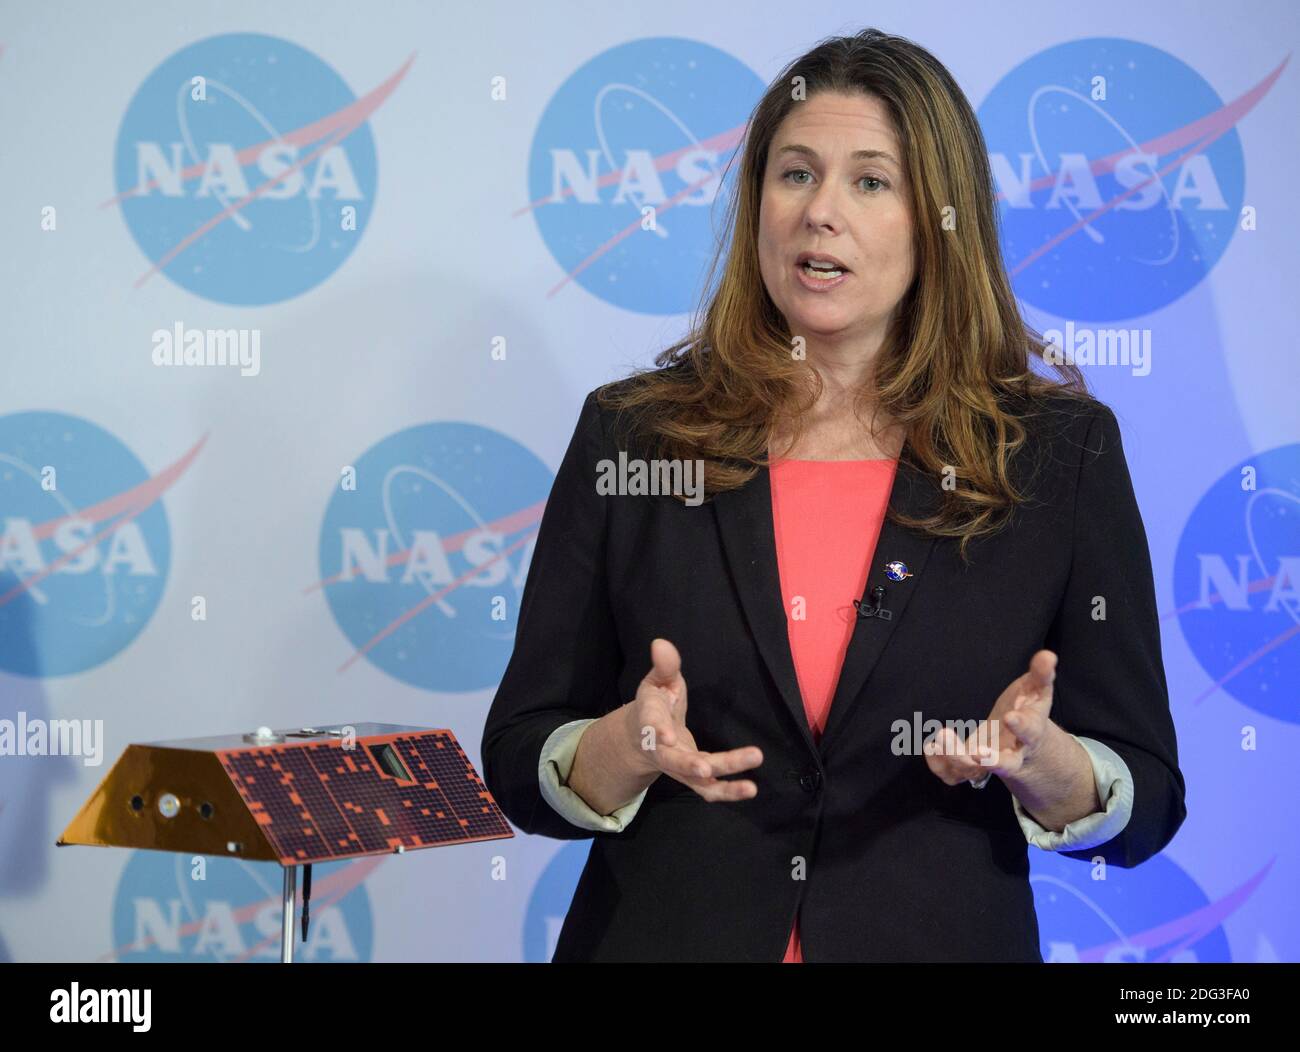 NASA Office of Communications Media Contact Karen Fox speaks during a pre-launch briefing on the GRACE-FO mission at NASA Headquarters April 30, 2018 in Washington, DC. Stock Photo